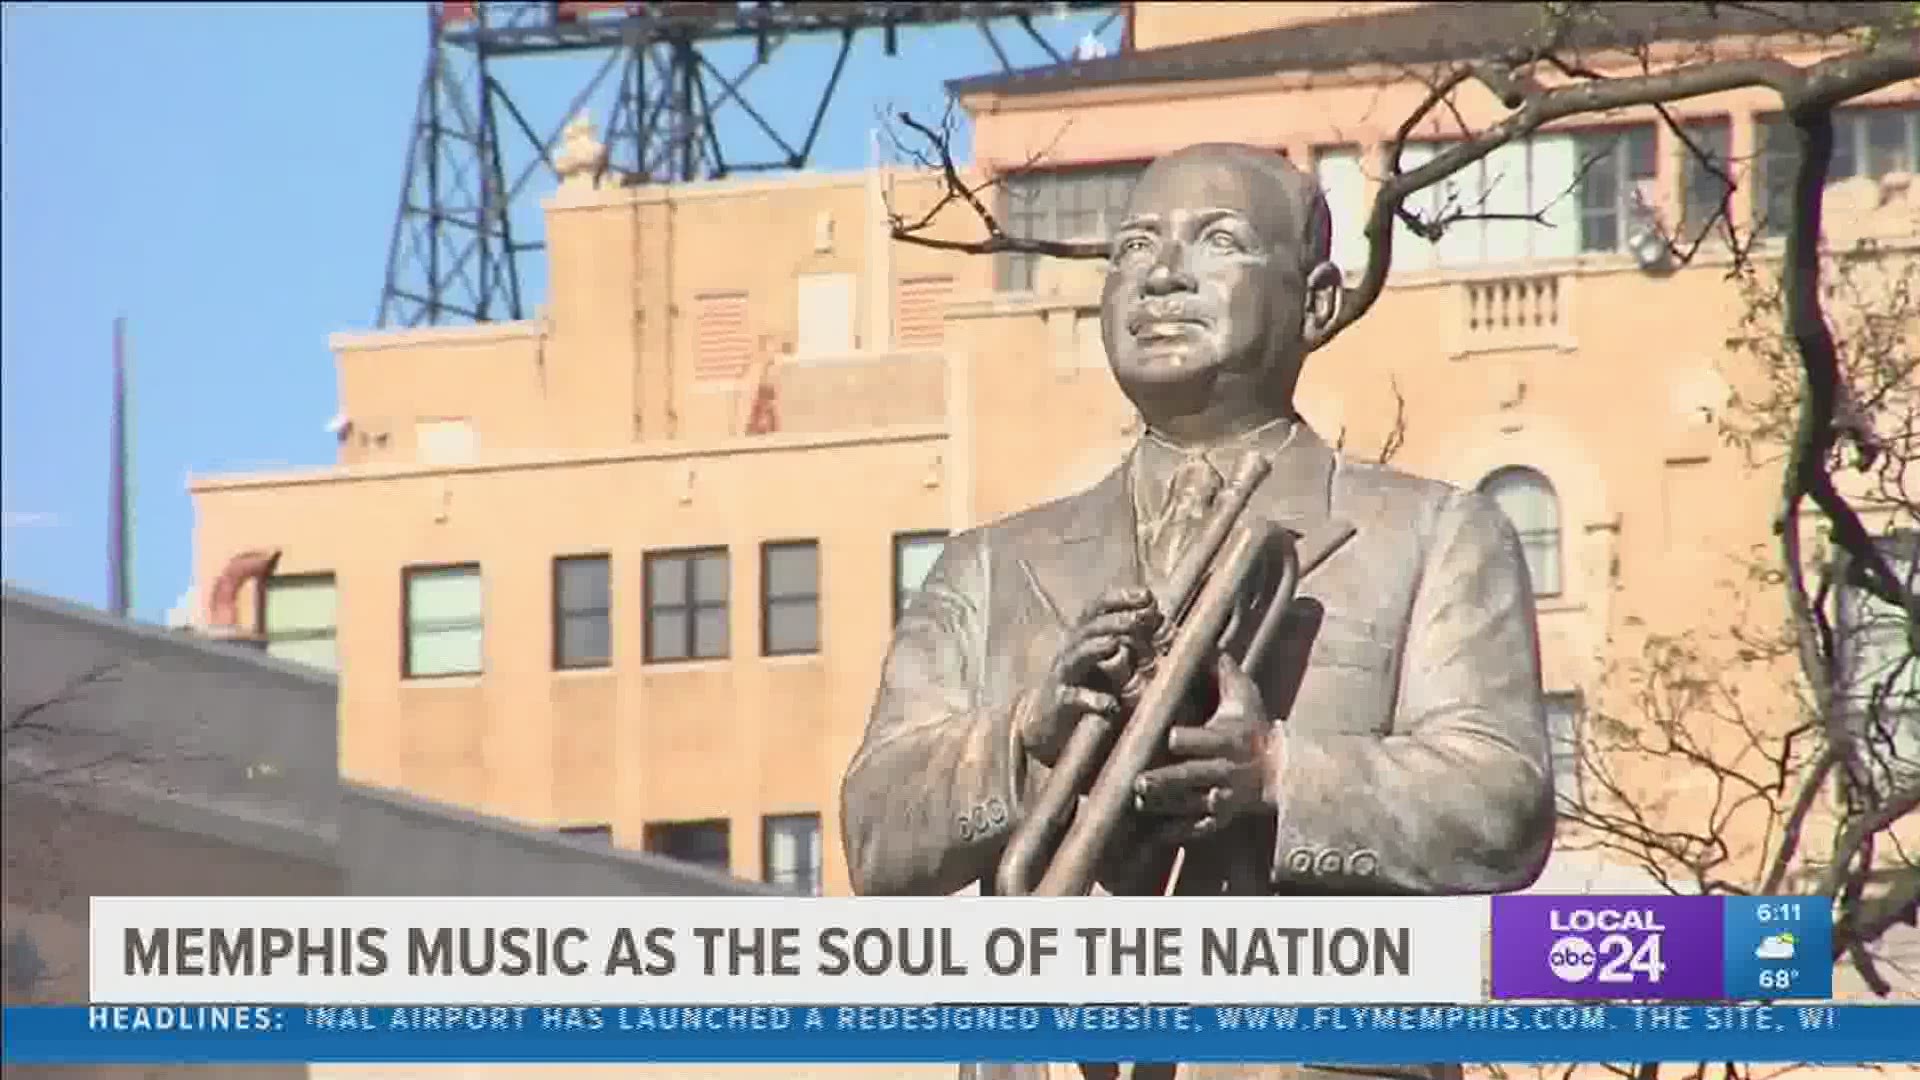 Local 24 News anchor Katina Rankin explains Memphis' music scene always has been the "Soul of the Nation."